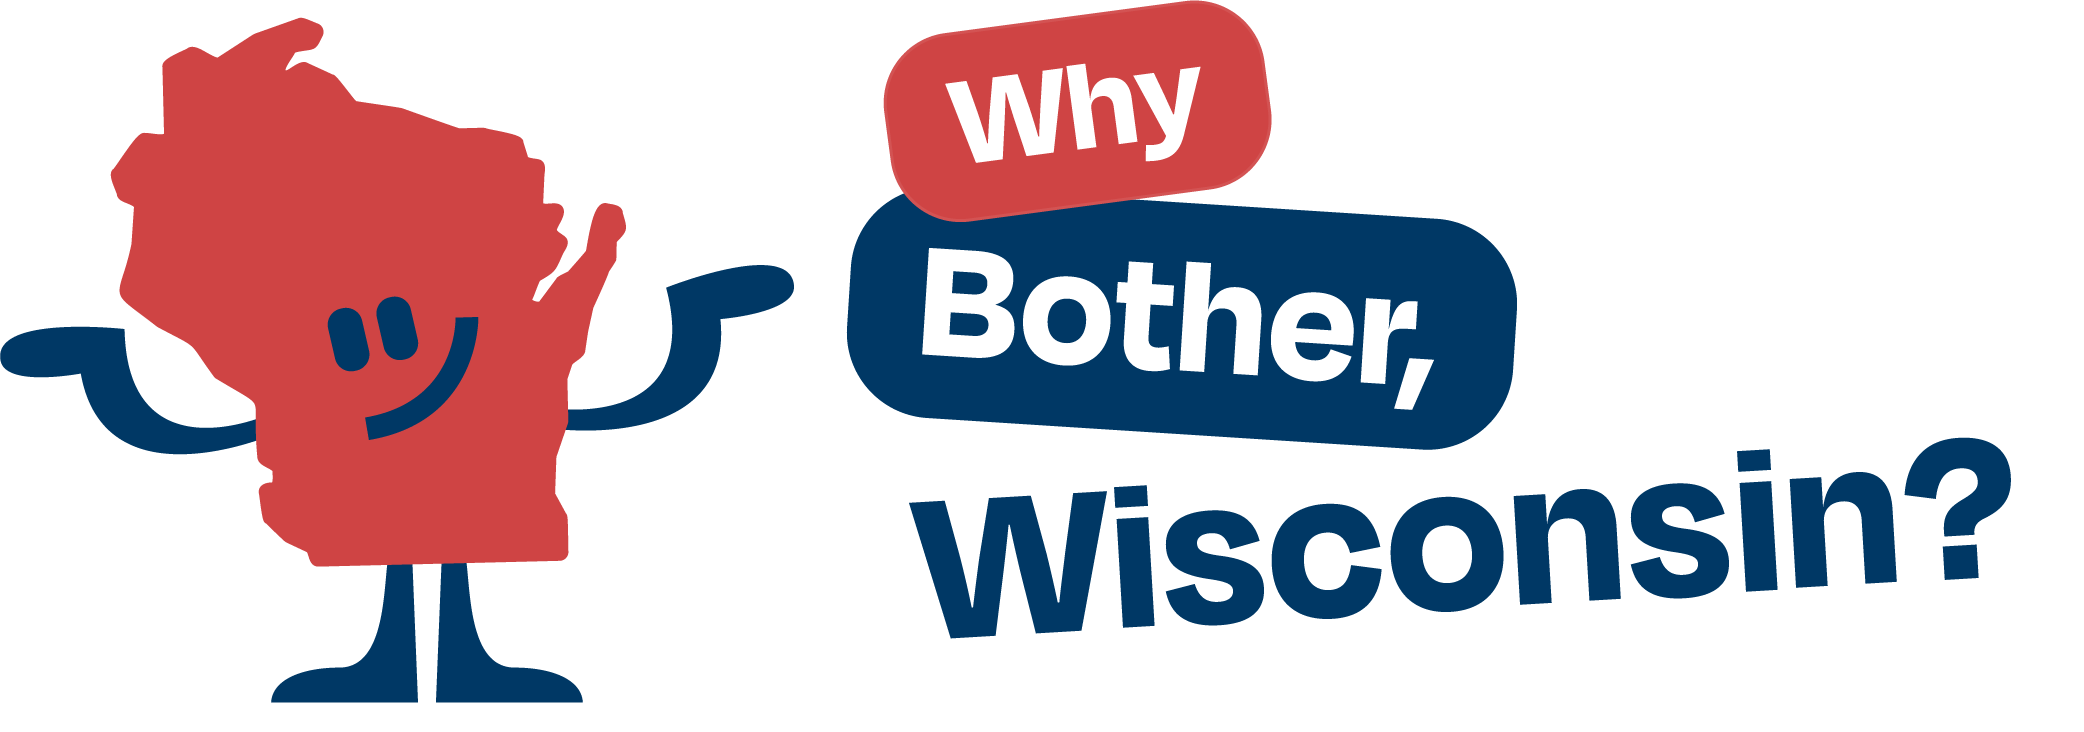 Why Bother, Wisconsin Logo